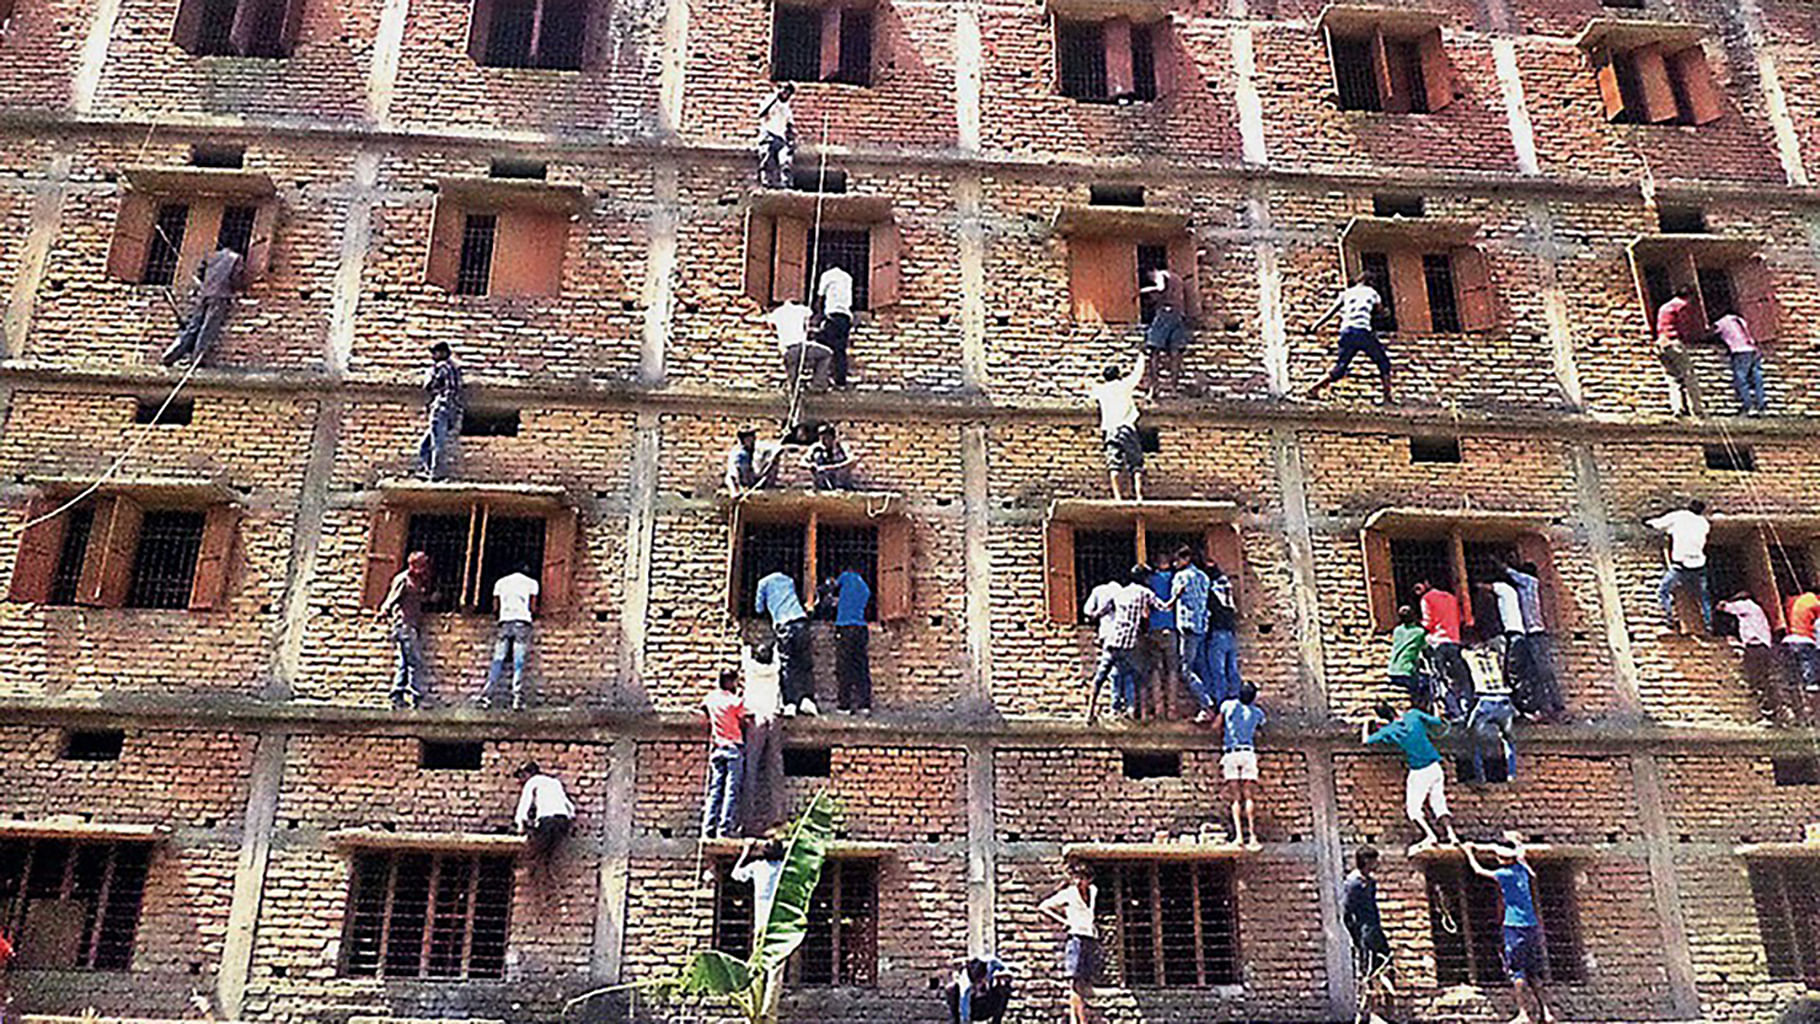 In this file photo, kin of class X examinees climbed many
floors to pass on books and chits in Bihar. (Photo: AP)